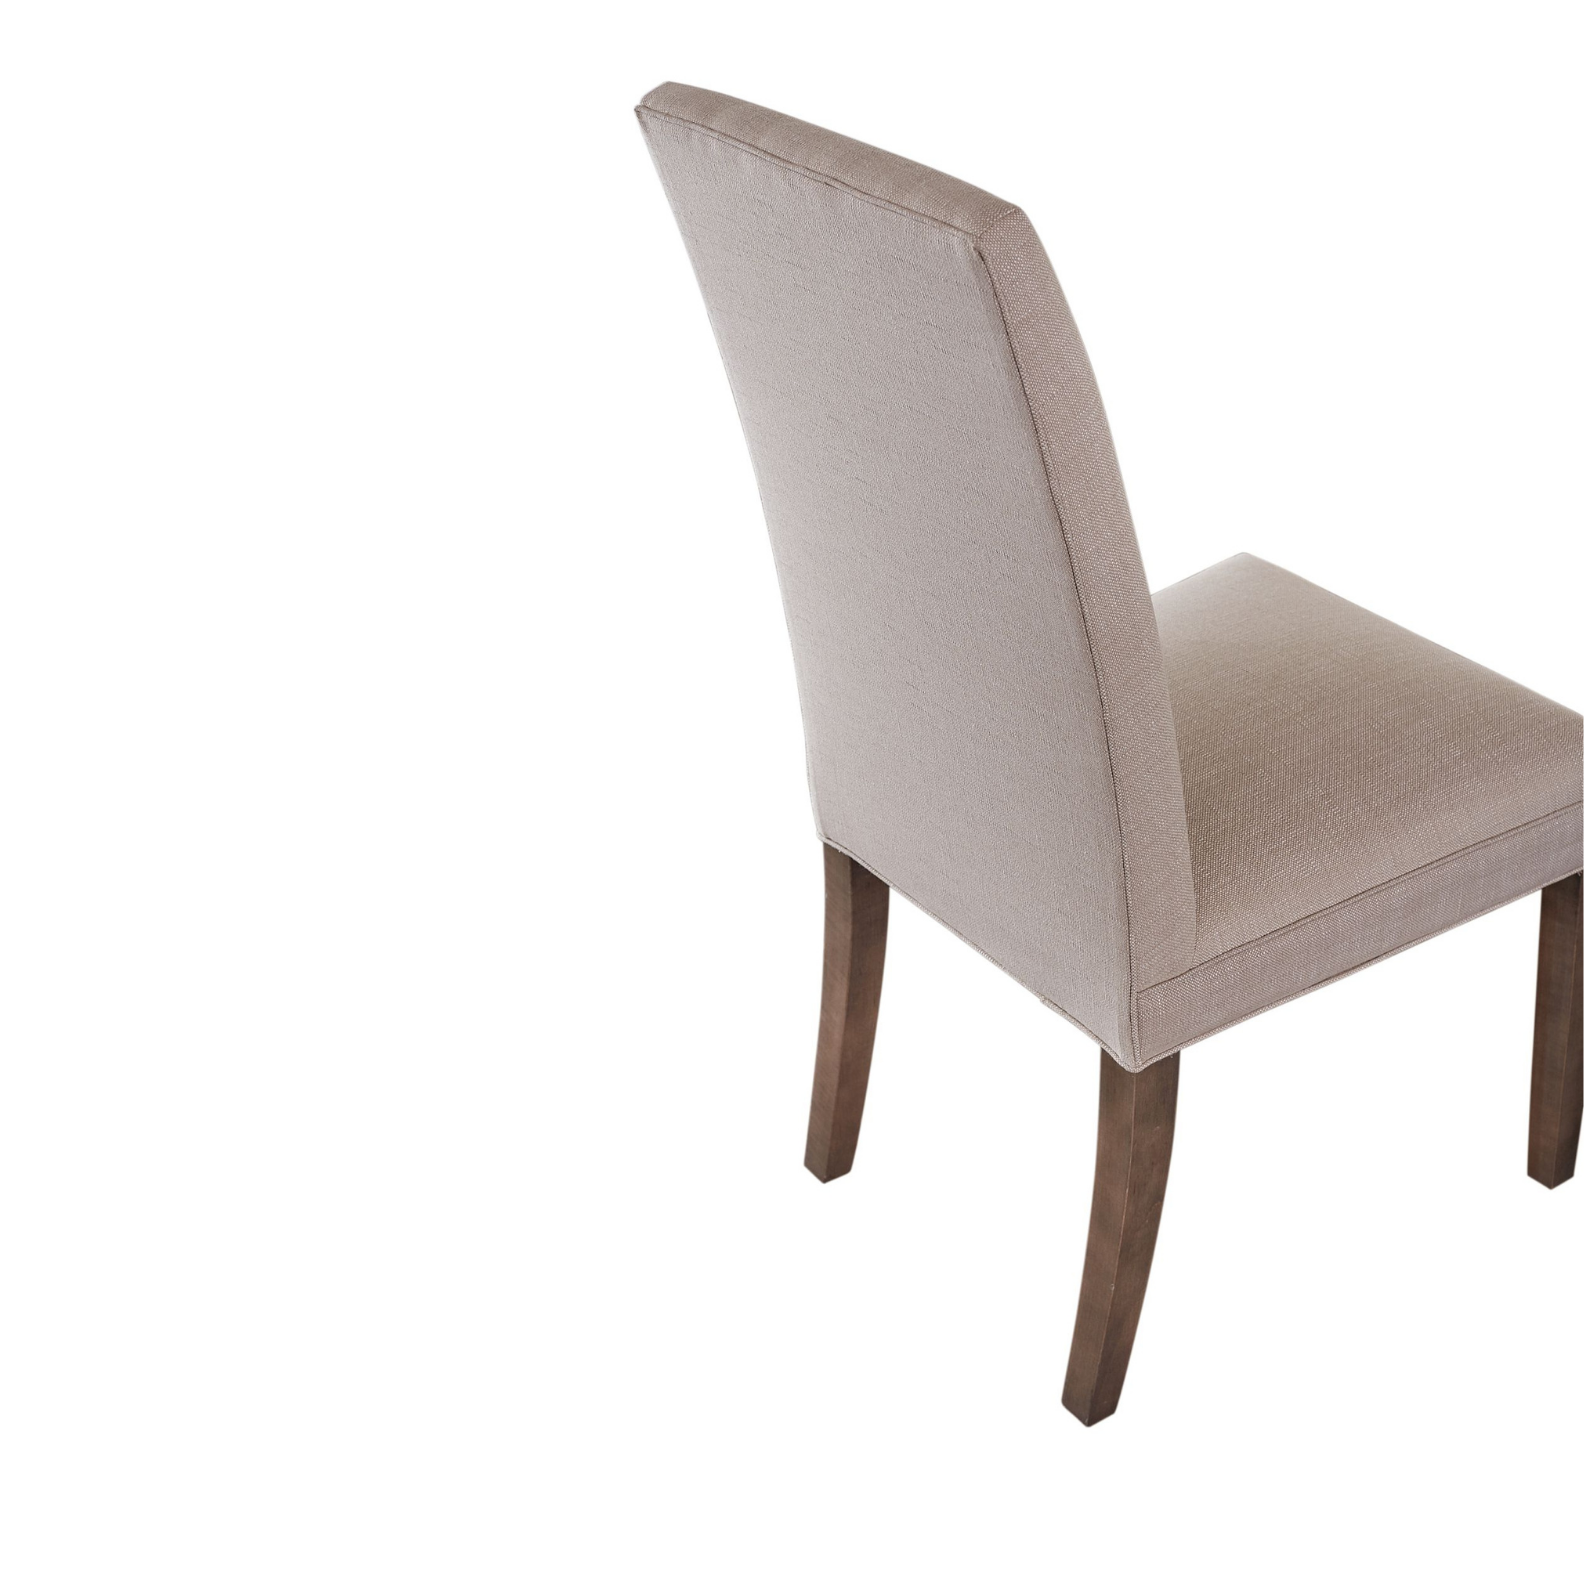 Marge Maple Upholstered Dining Chair